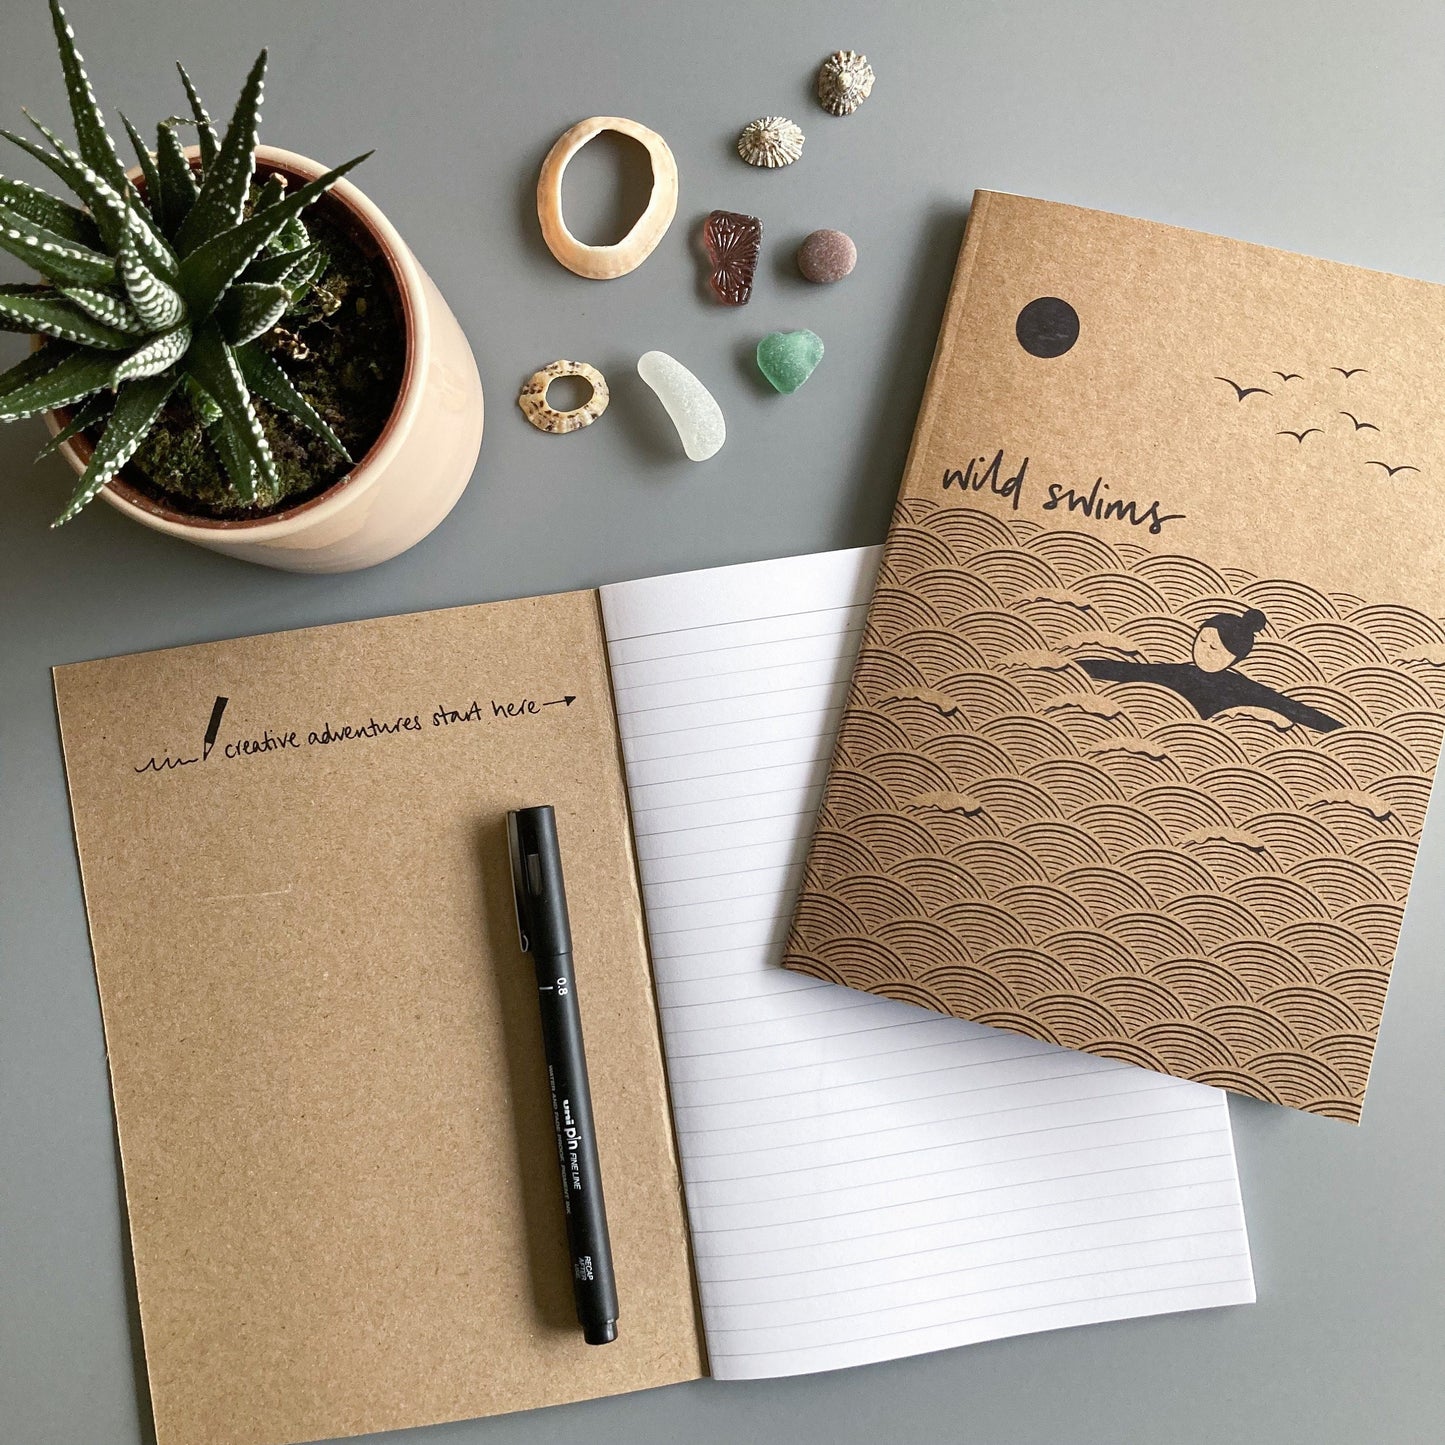 Wild swims individual A5 notebook